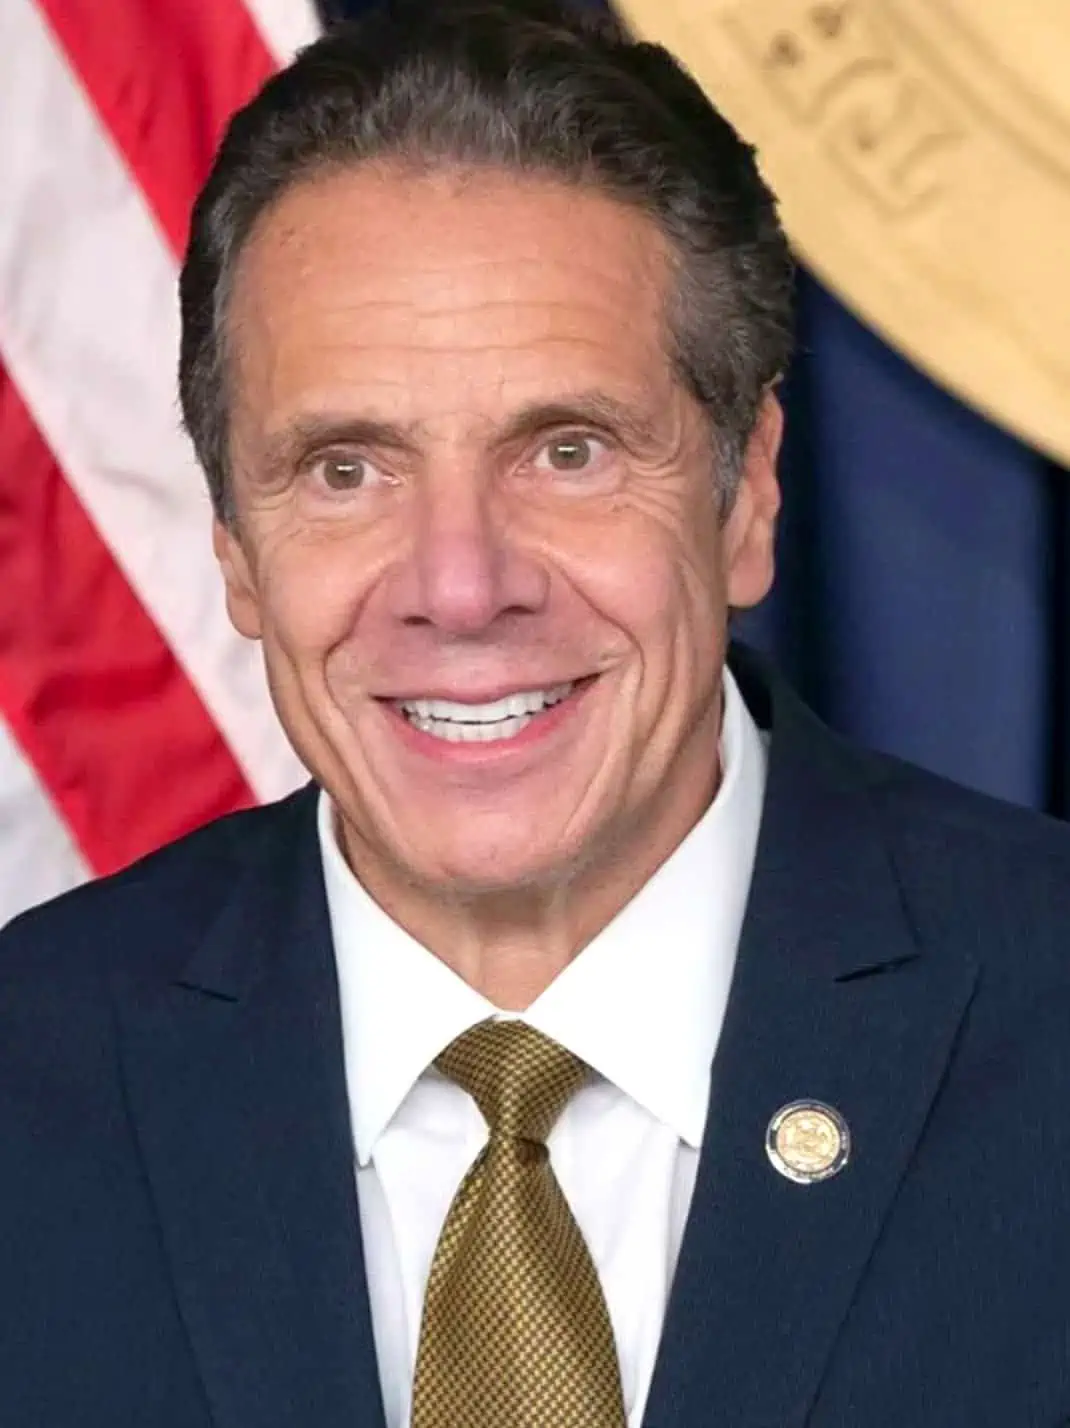 Andrew Cuomo

Party: Democrat
Role: Former Governor of New York
Supports marijuana legalization on a federal level: Yes!